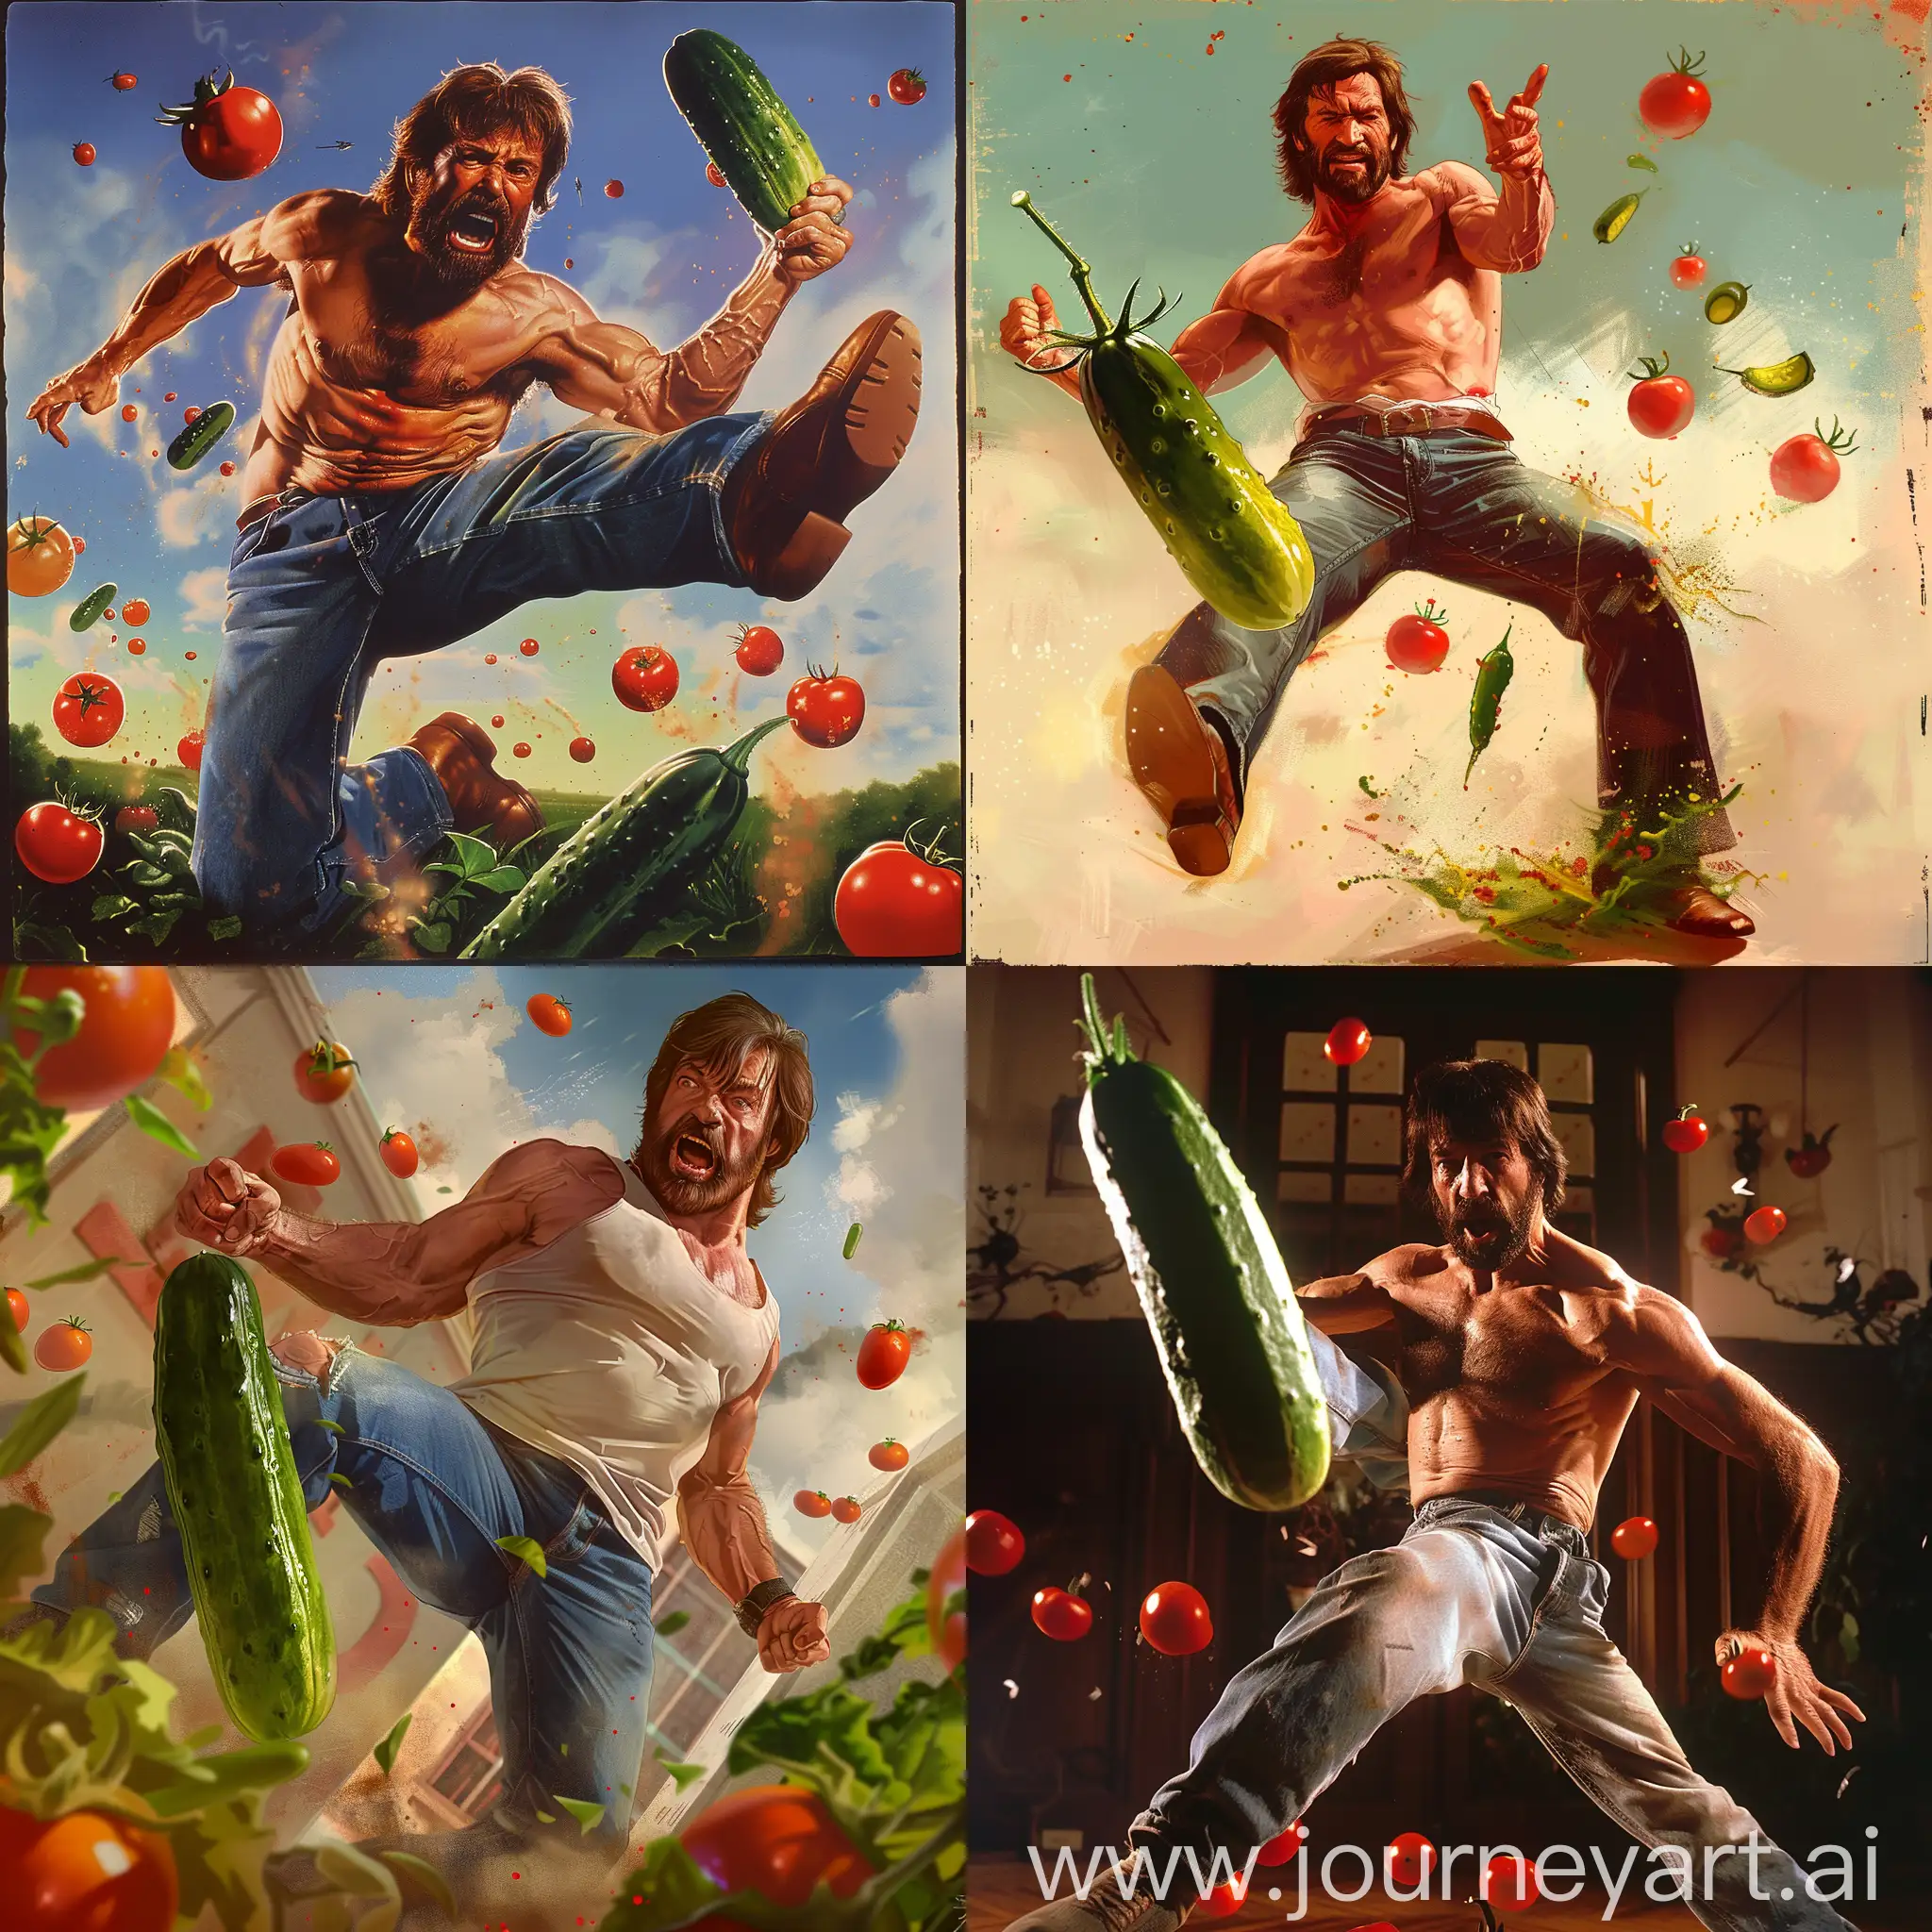 Chuck Norris kicks a cucumber and there are flying tomatoes around him